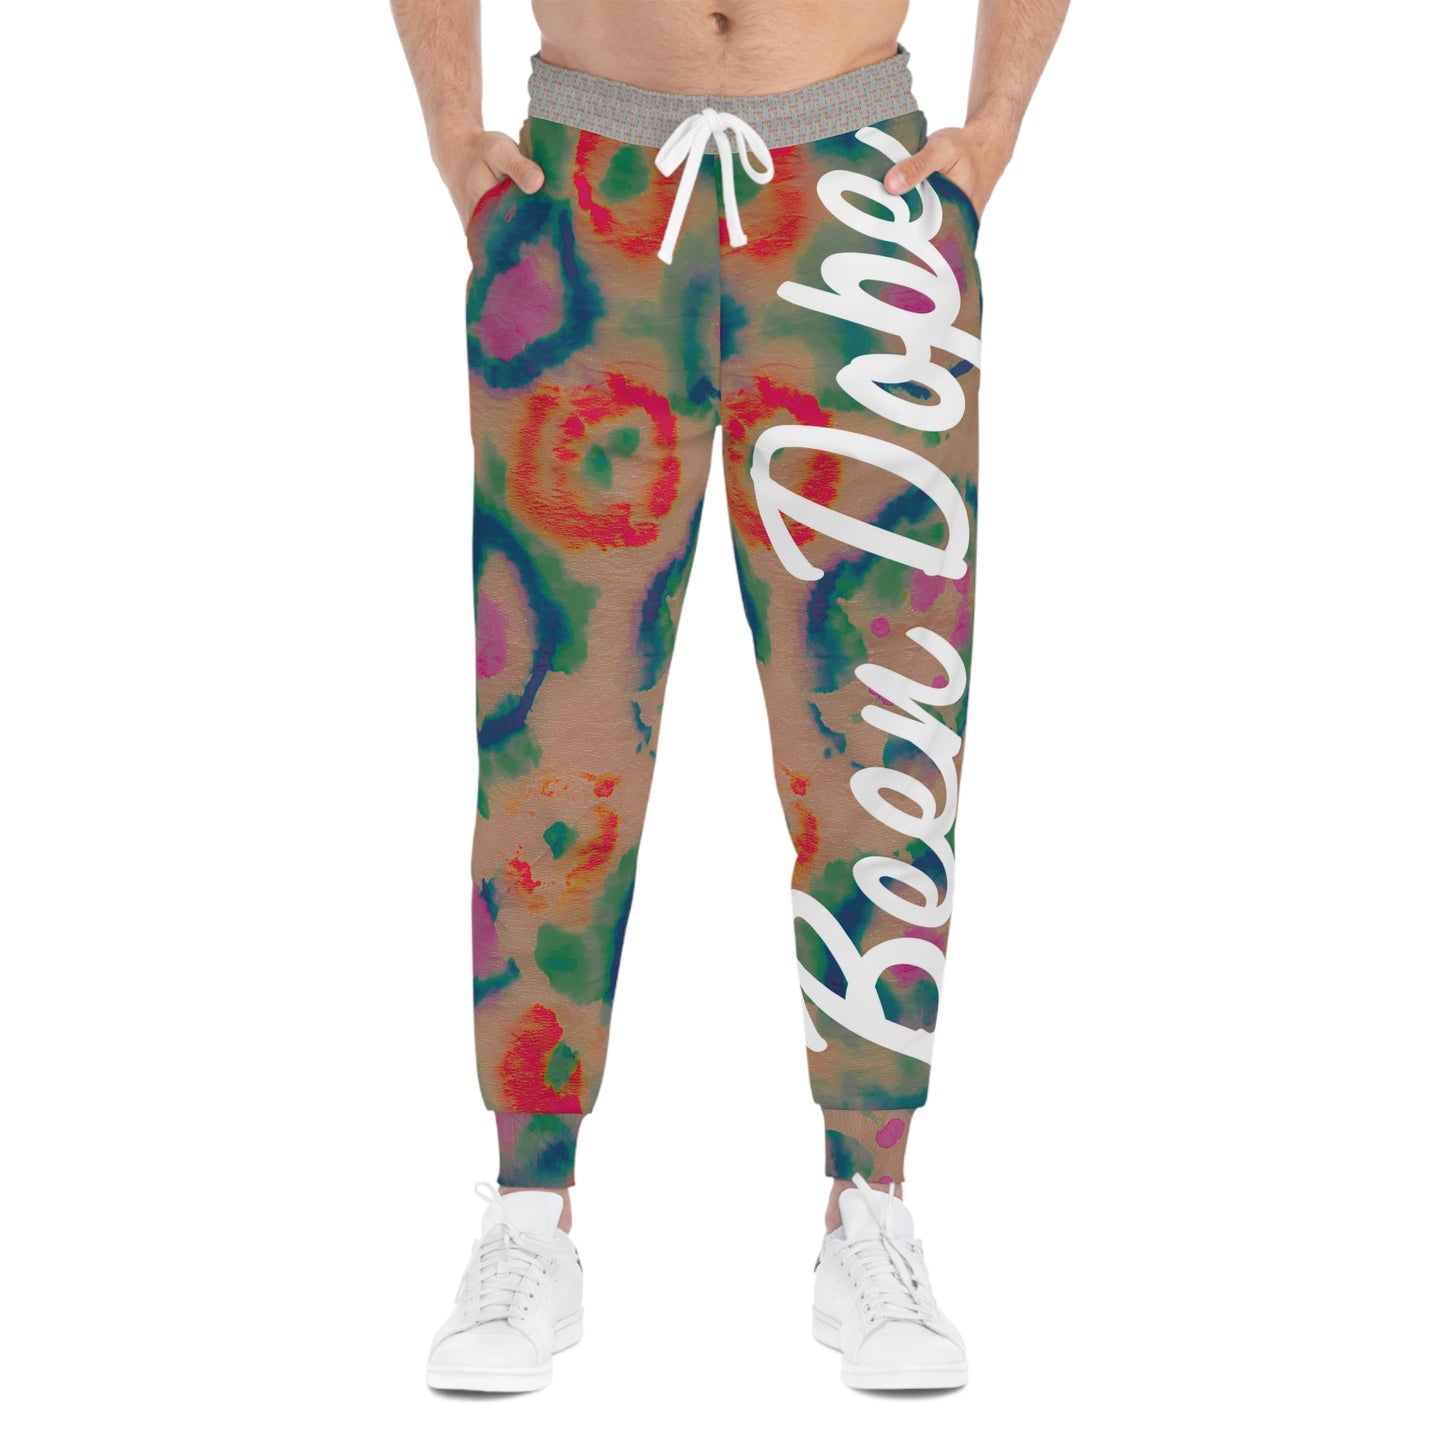 Been Dope Supply | Joggers for Women and Men